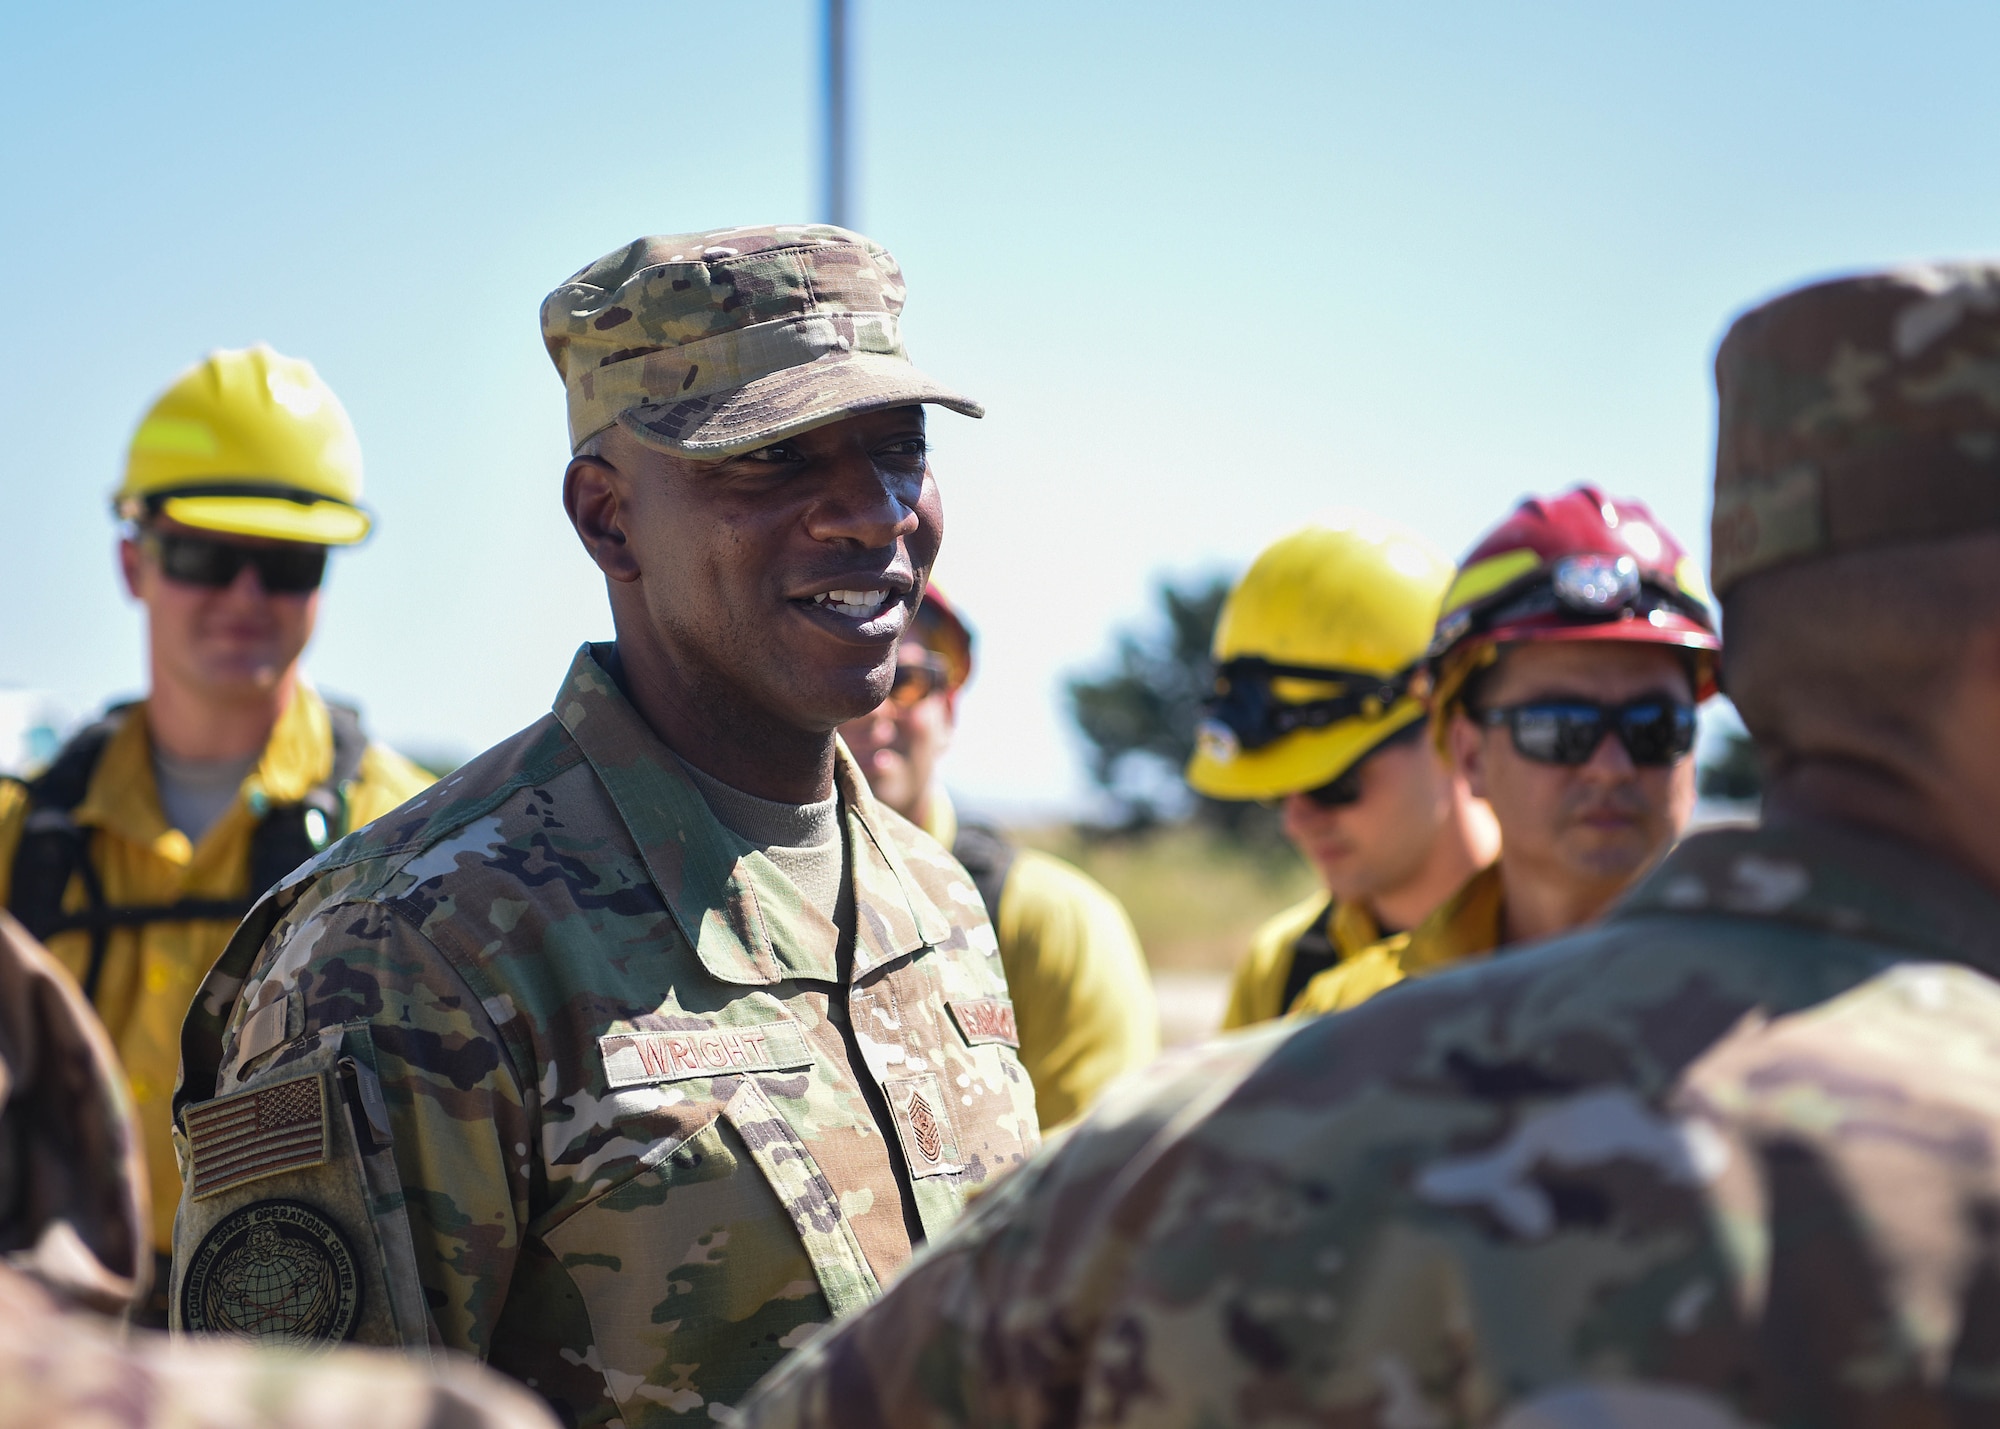 Chief Master Sergeant of the Air Force Kaleth O. Wright visits the 30th Civil Engineer Squadron high voltage pole training yard for a demonstration Sept. 25, 2019, at Vandenberg Air Force Base, Calif. Wright was able to meet with members assigned to the Air Force’s only Hot Shot team and Military Working Horse law enforcement unit, as well as witness them in action. (U.S. Air Force photo by Airmen 1st Class Hanah Abercrombie)